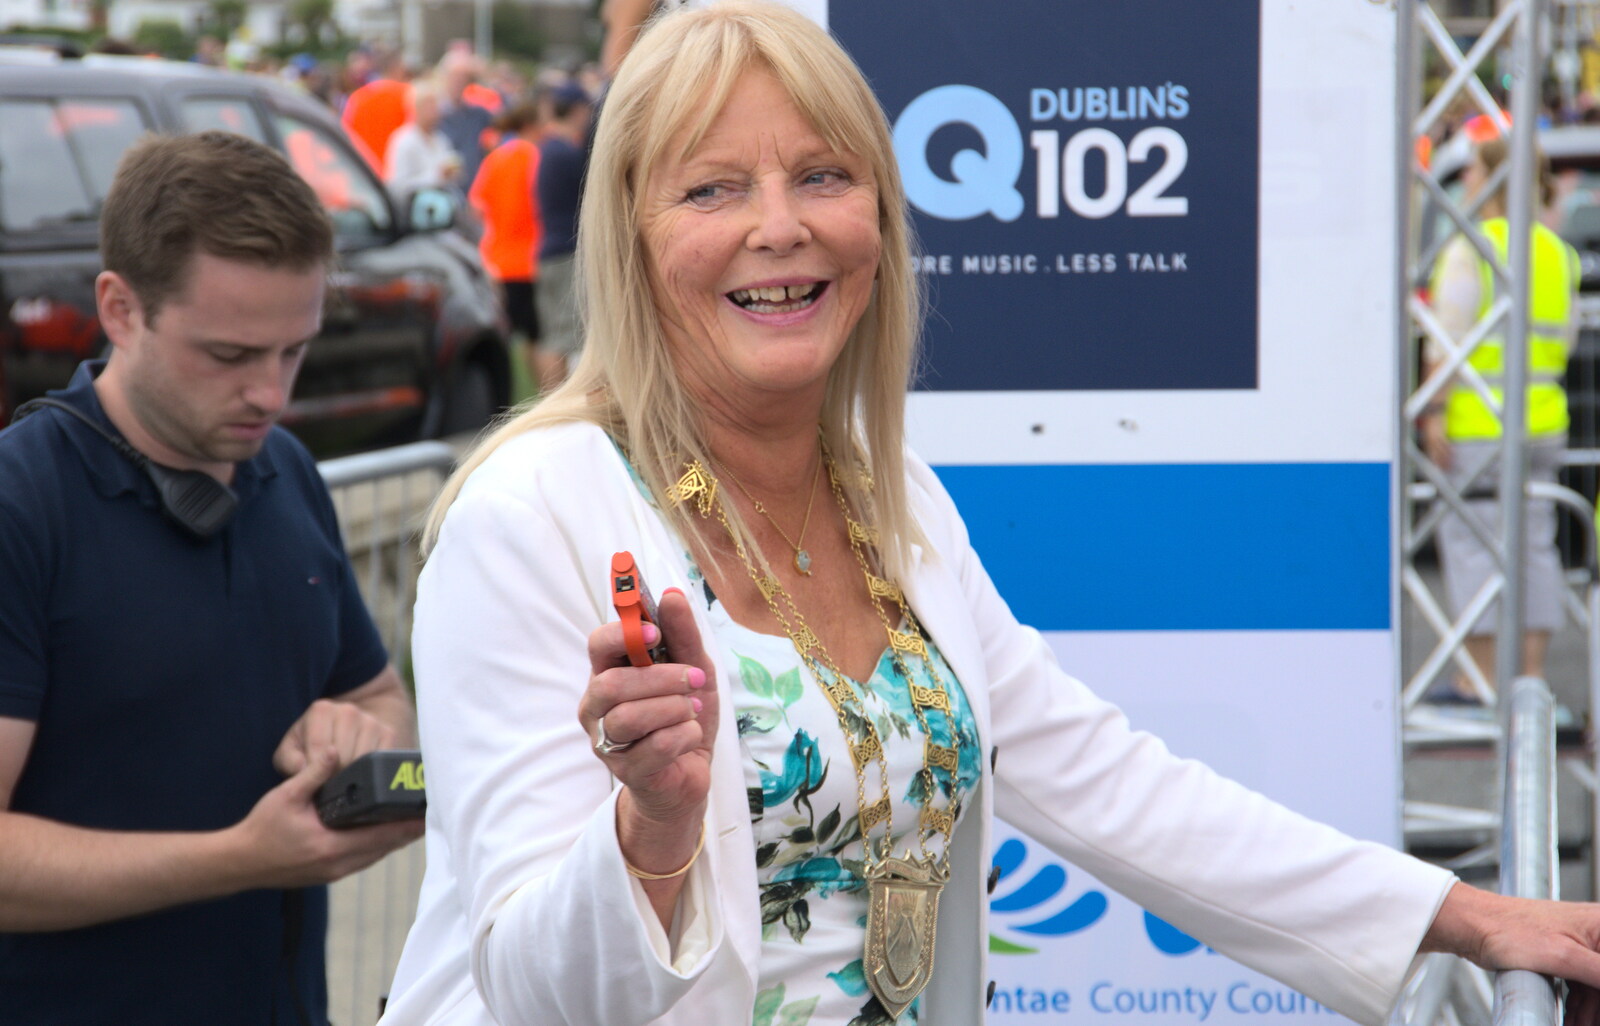 The mayor of Dún Laoghaire has a pistol from The Dún Laoghaire 10k Run, County Dublin, Ireland - 6th August 2018